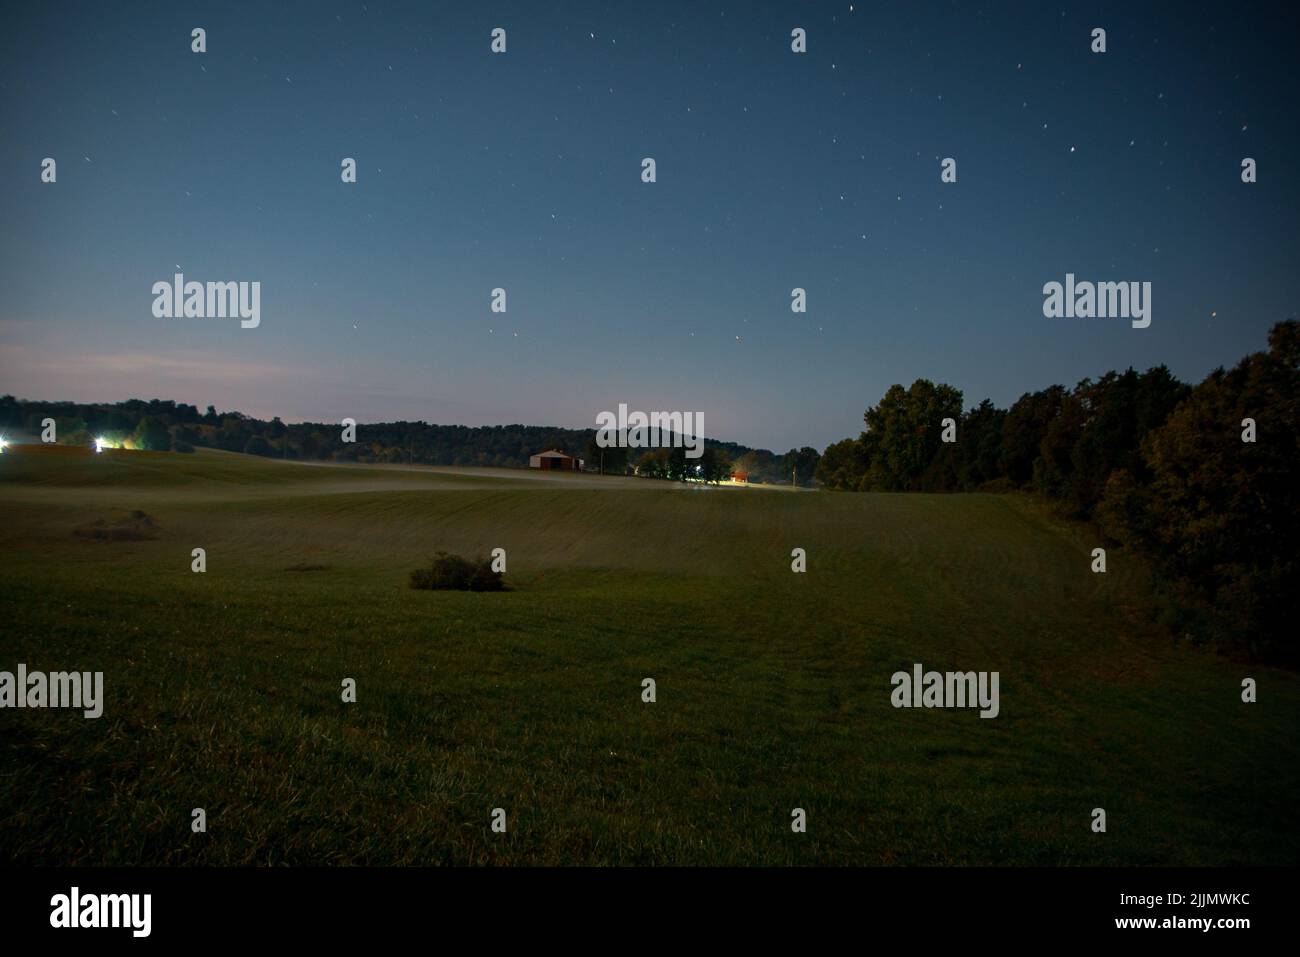 A field under the starry sky Stock Photo